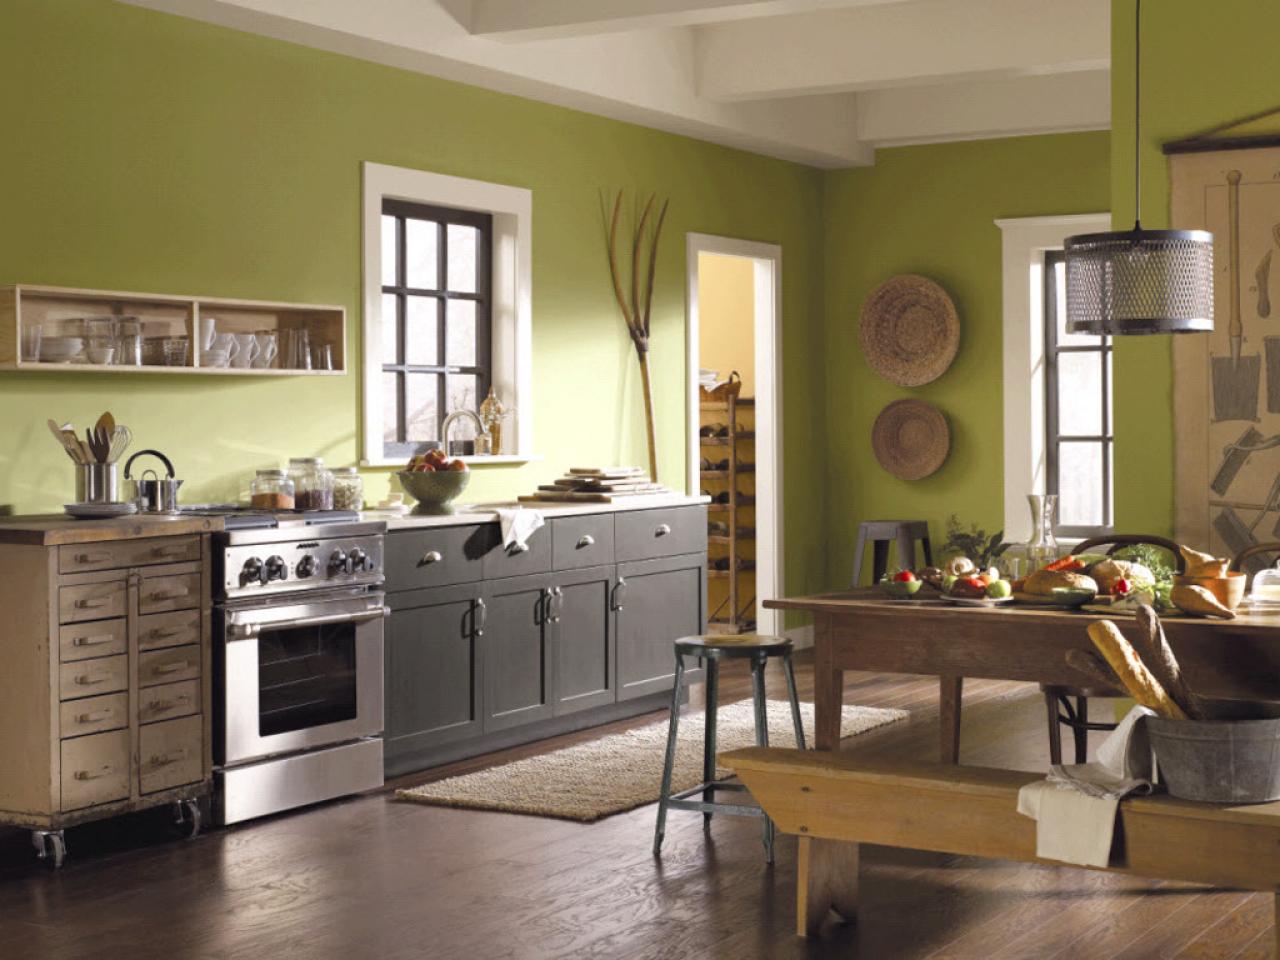 Green Kitchen Paint Colors Pictures & Ideas From HGTV   HGTV